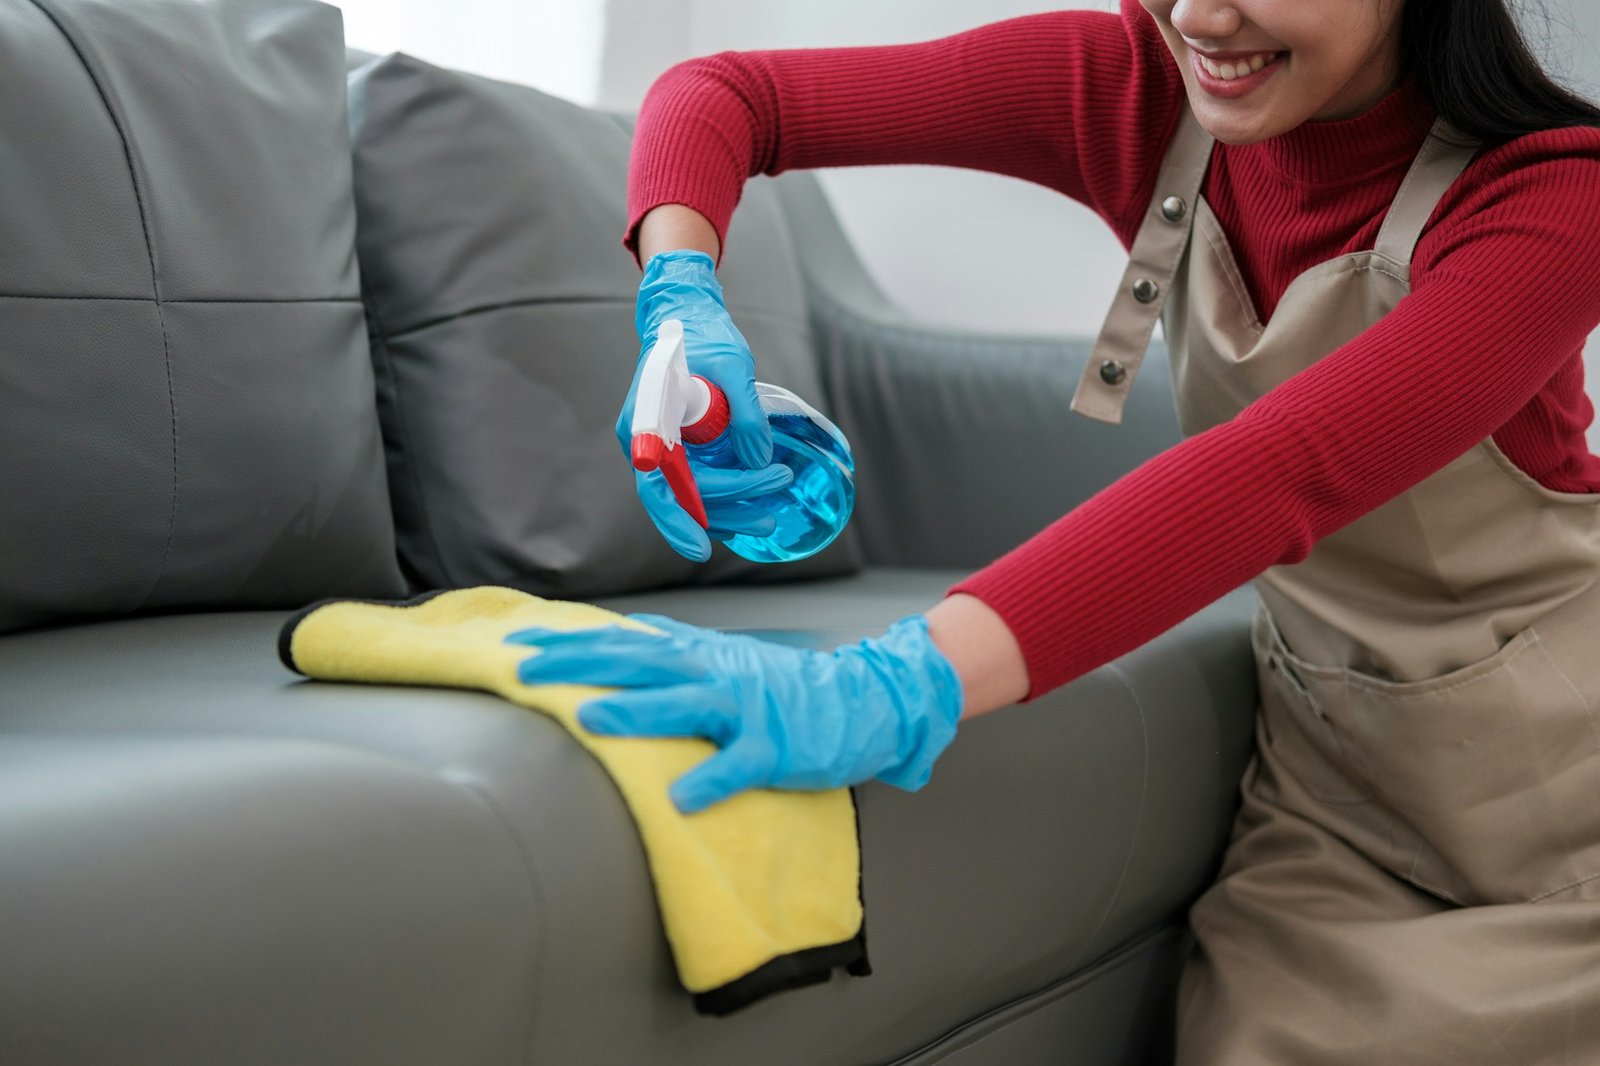 Professional cleaning service, housekeeping. Hygiene and cleanliness in the kitchen. Cleaning lady